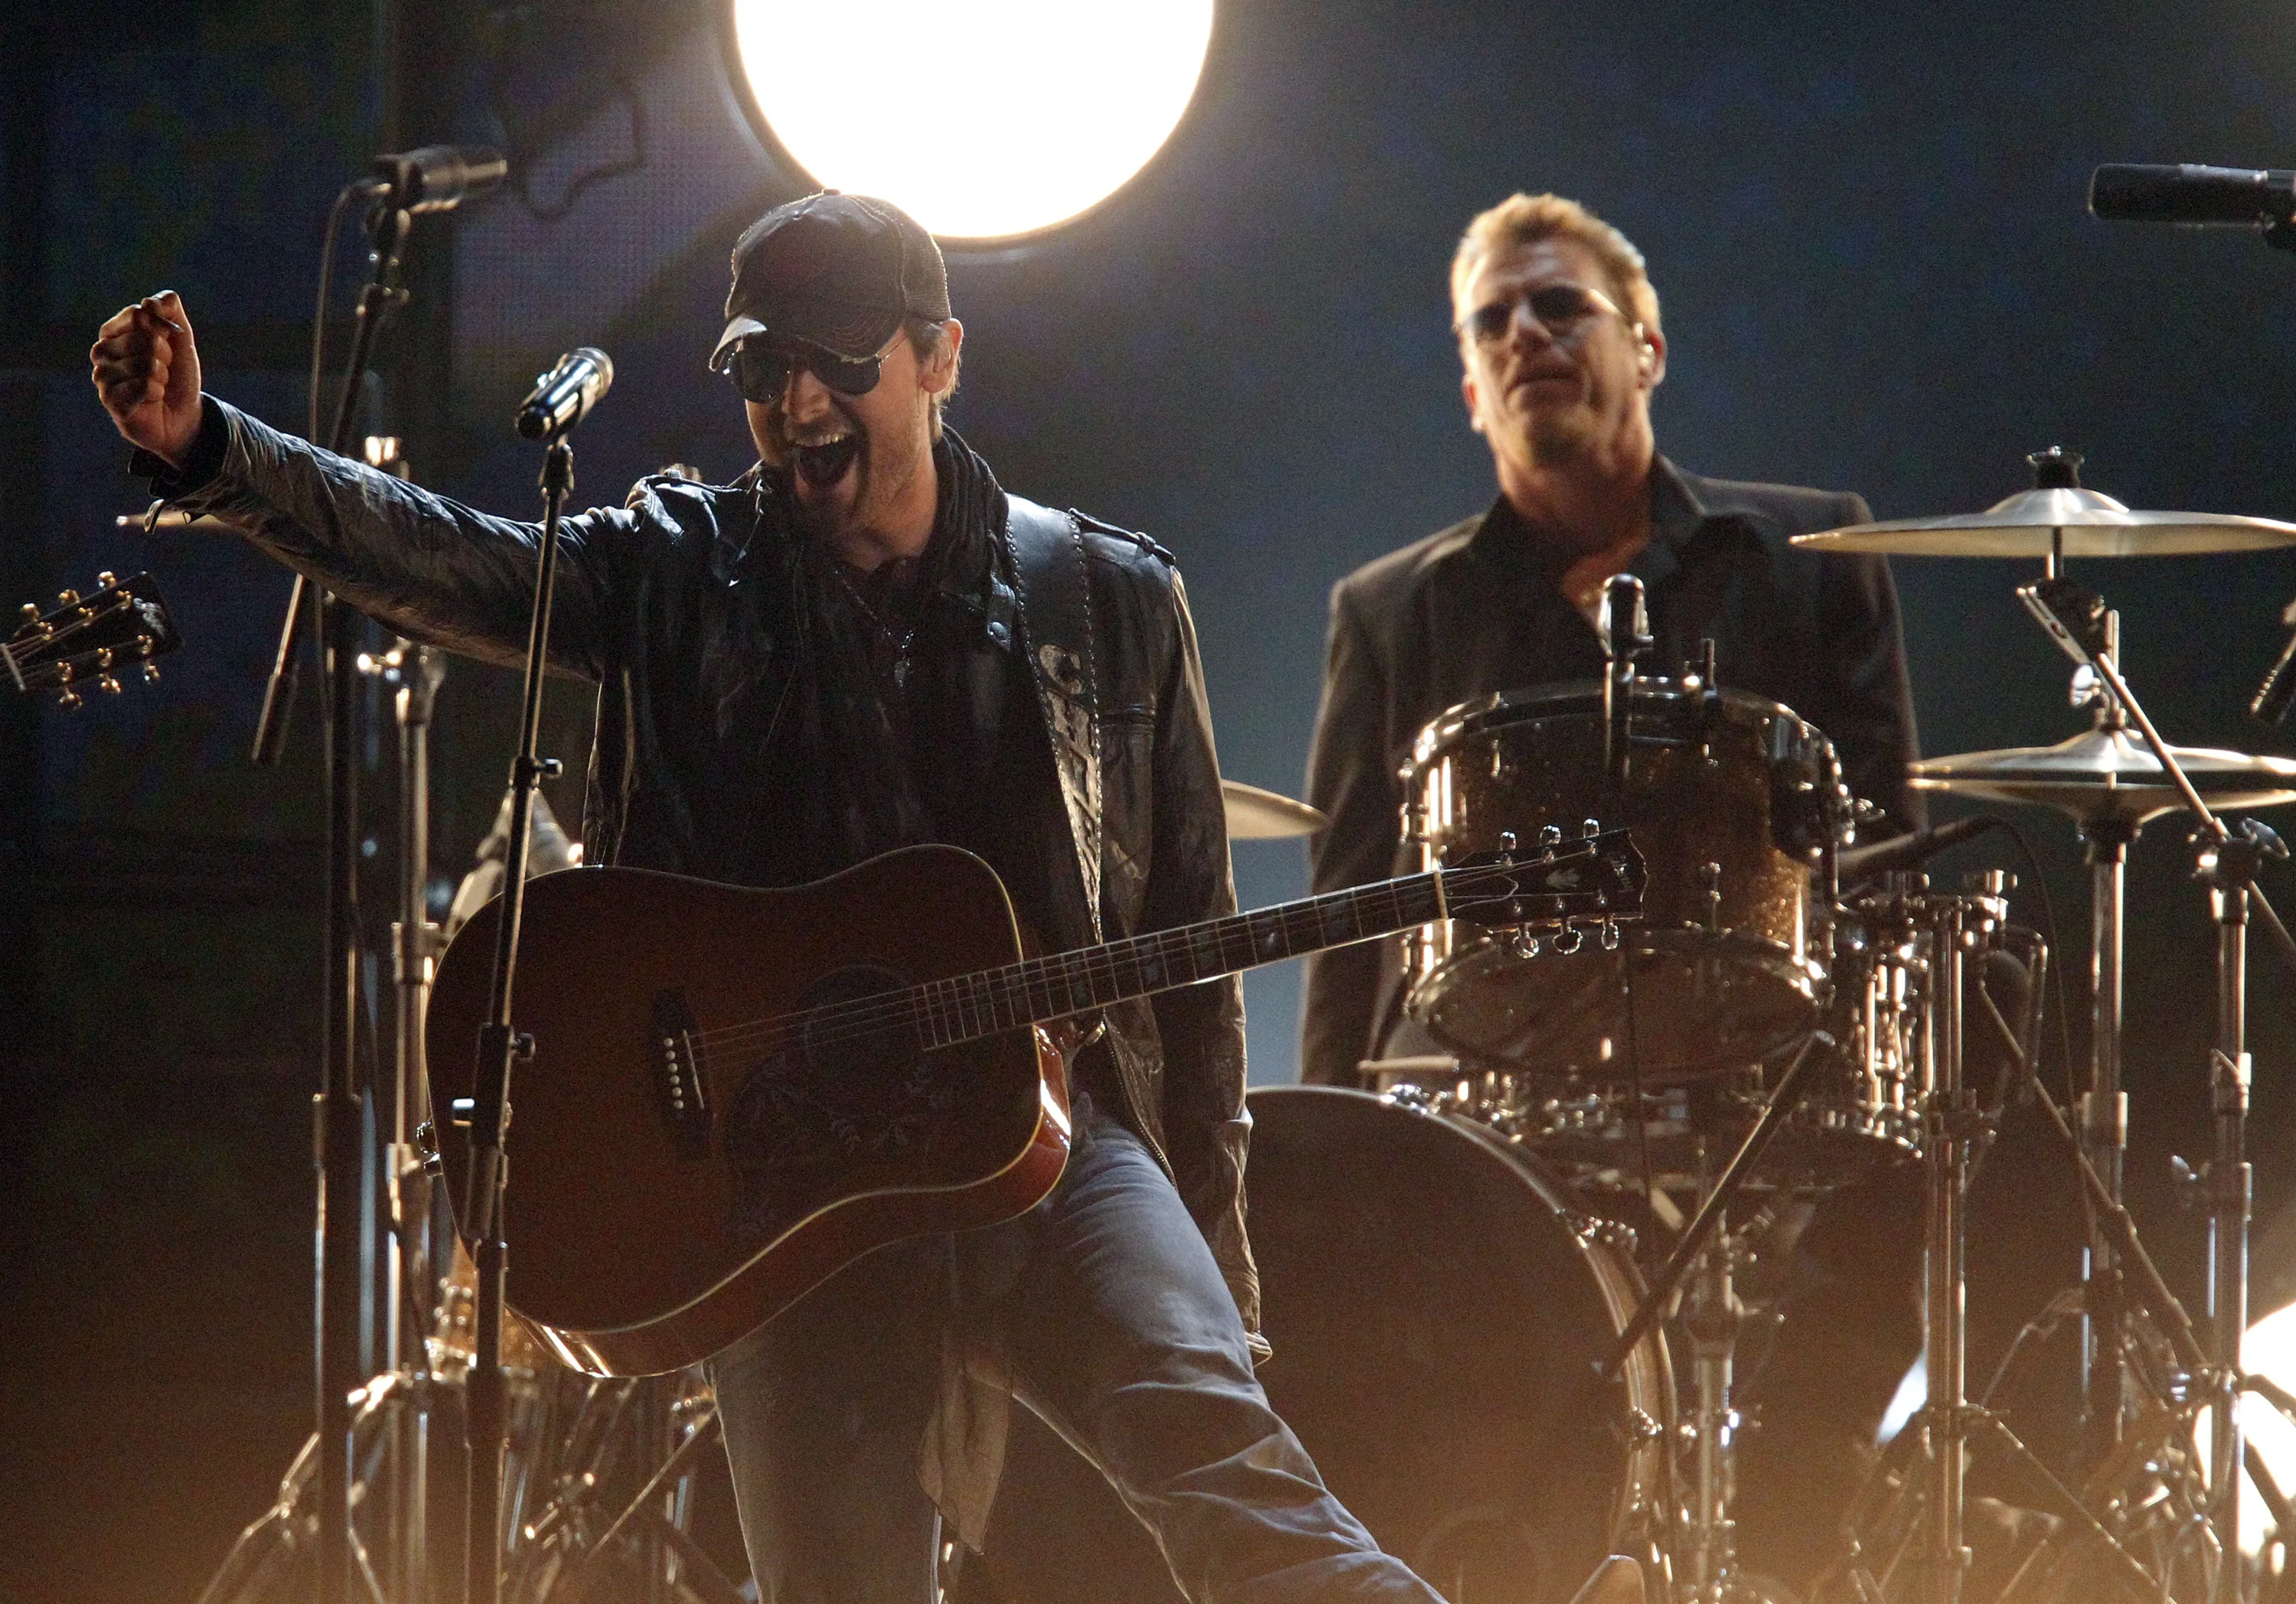 eric-church-performs-at-the-46th-country-music-association-awards-in-nashville